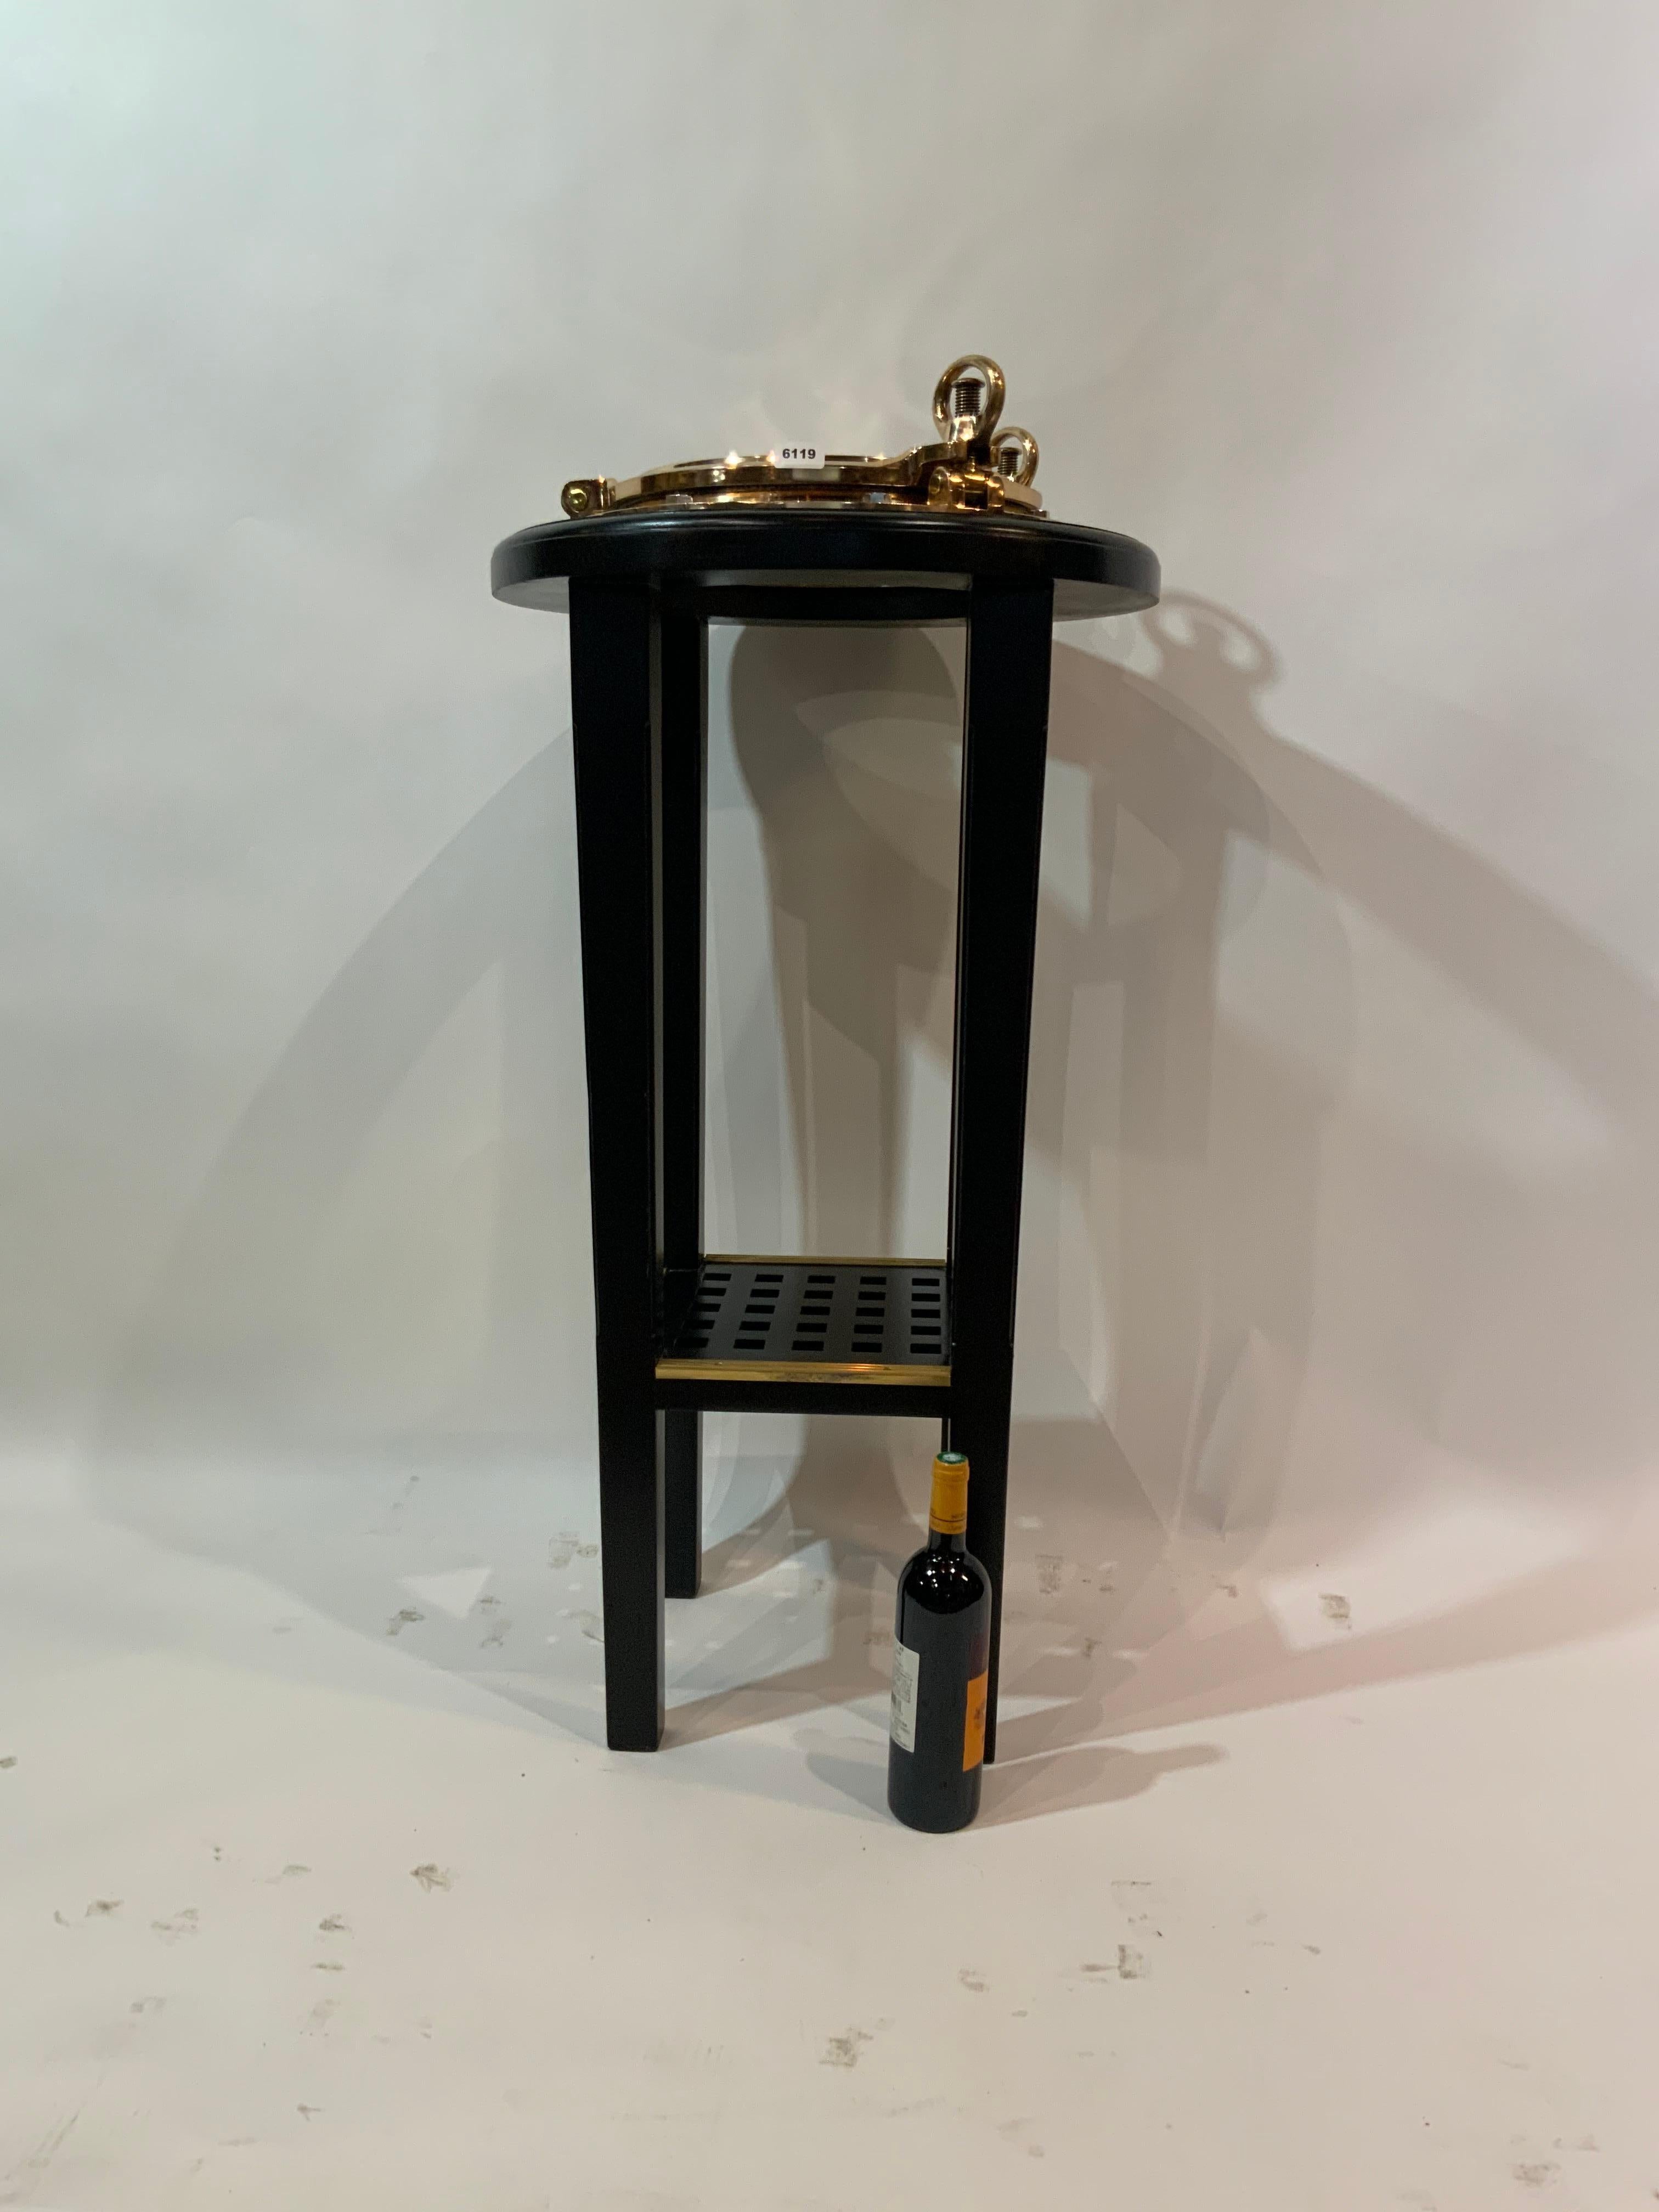 Solid brass ships porthole fitted to a bar height cocktail table stand. Highly polished and lacquered ships porthole has hinged door and two dog bolts. Stand has a ships grating shelf. Rich finish. Weight is 56 pounds. Dimensions are 40 tall by 22